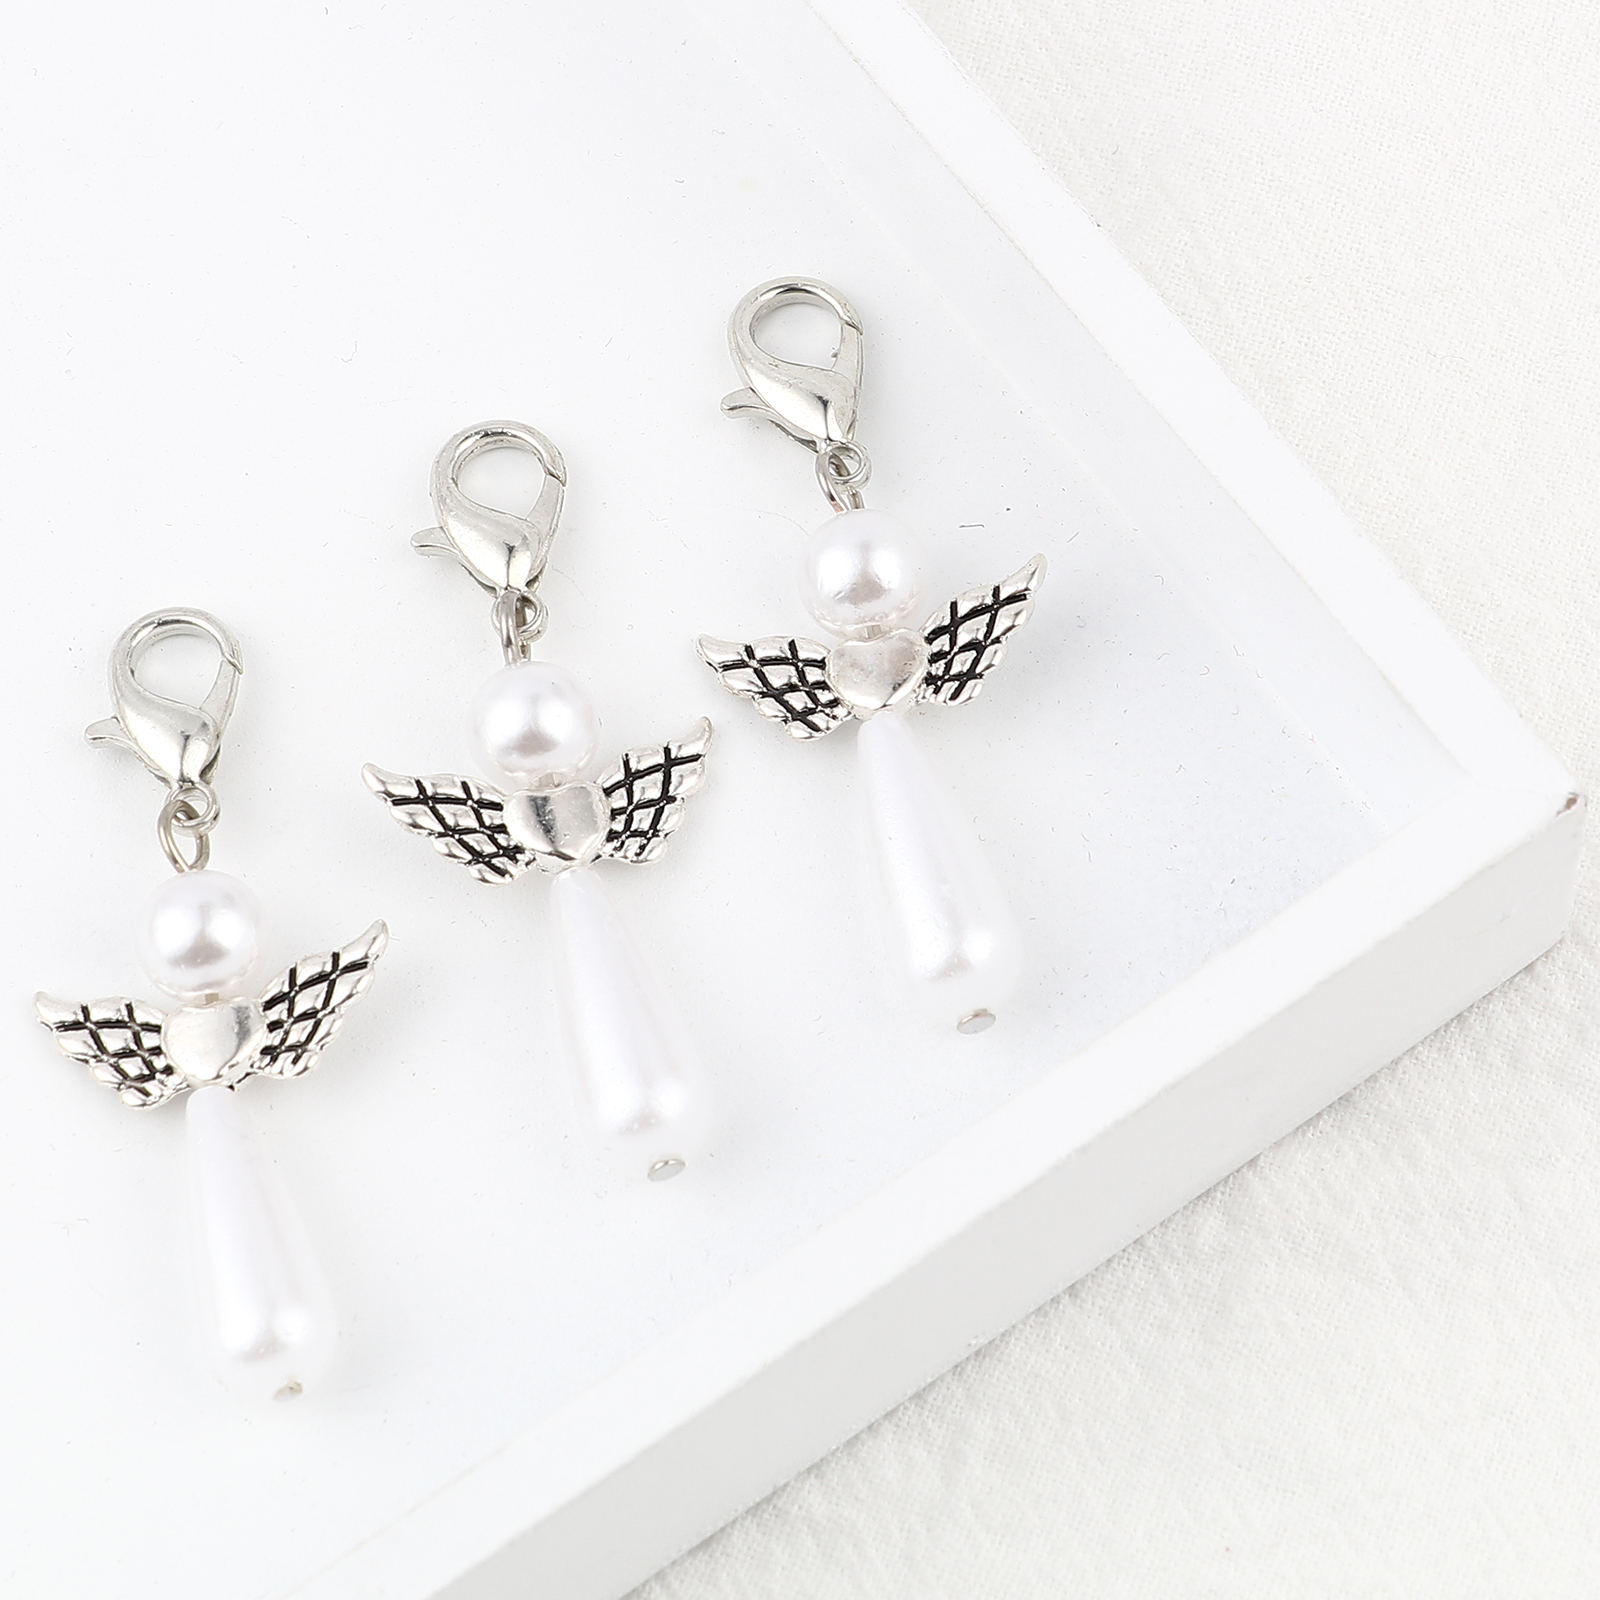 Picture of Zinc Based Alloy Knitting Stitch Markers Angel Antique Silver Color White 38mm x 22mm, 5 PCs